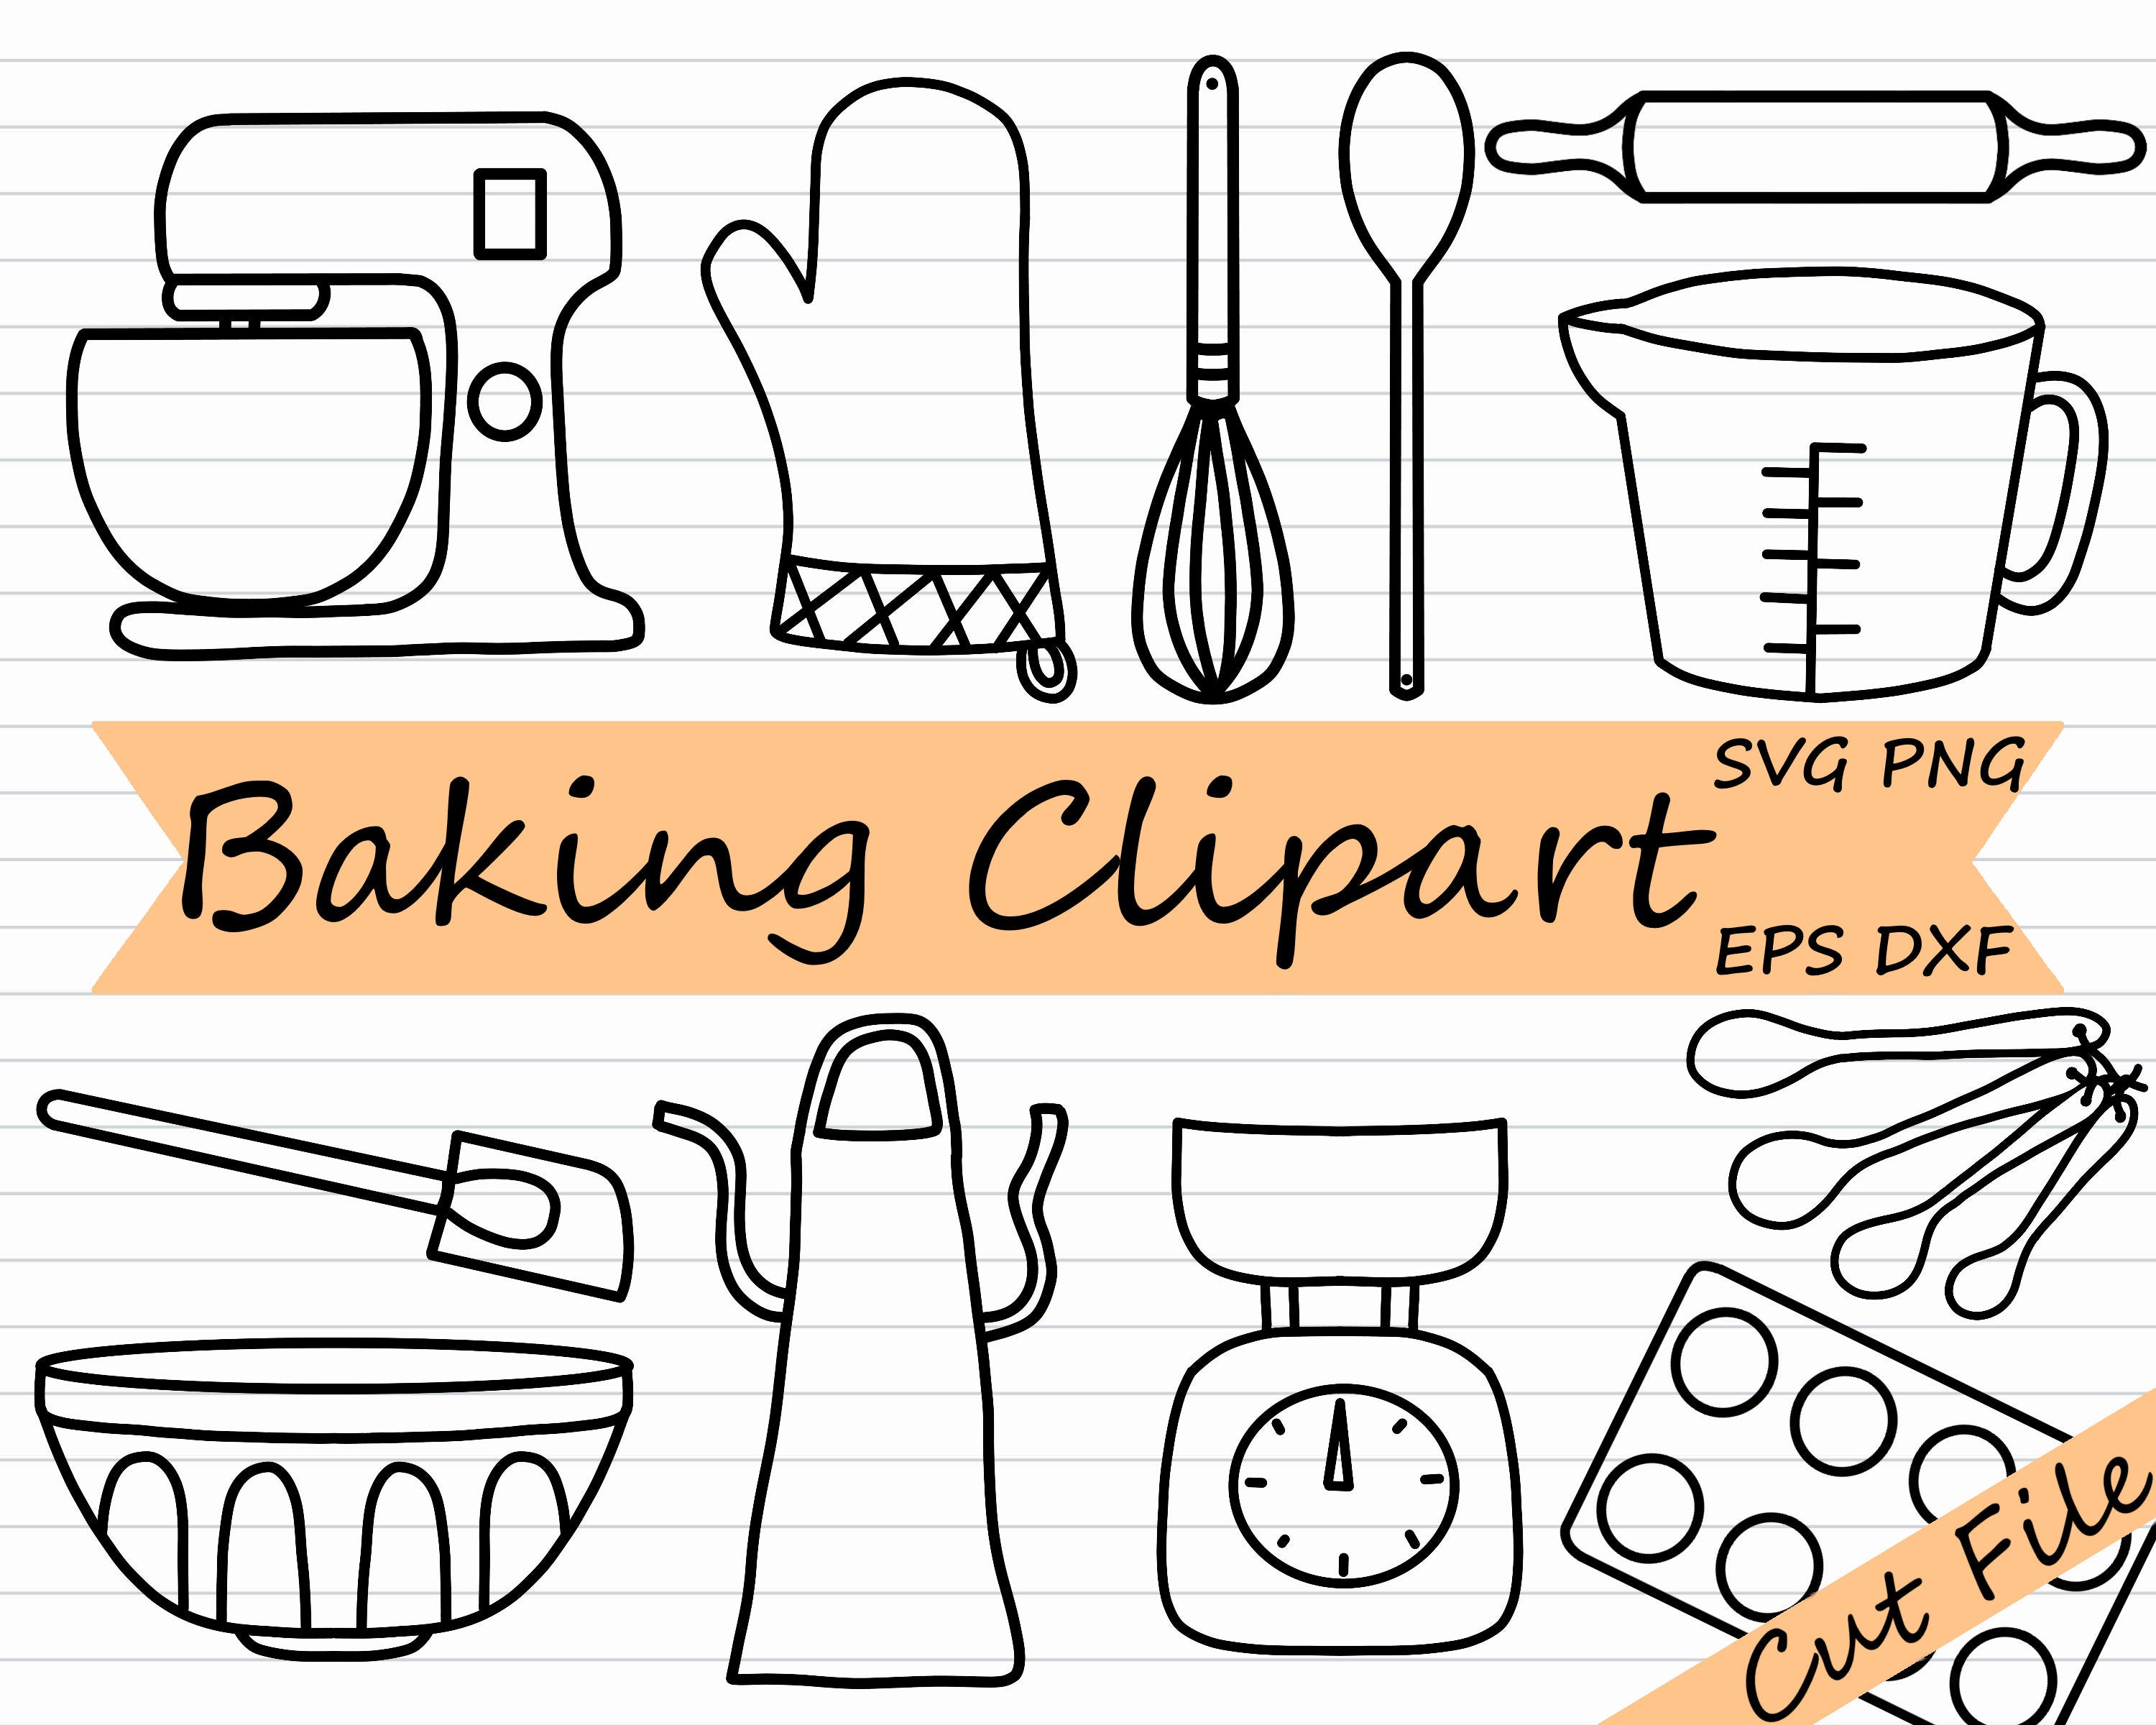 Baking SVG - Kitchen Utensils SVG, Cooking Clipart, Baking Cut File, Cricut, Silhouette DXF, Black and White, Baking Graphic, Bakery, Recipe